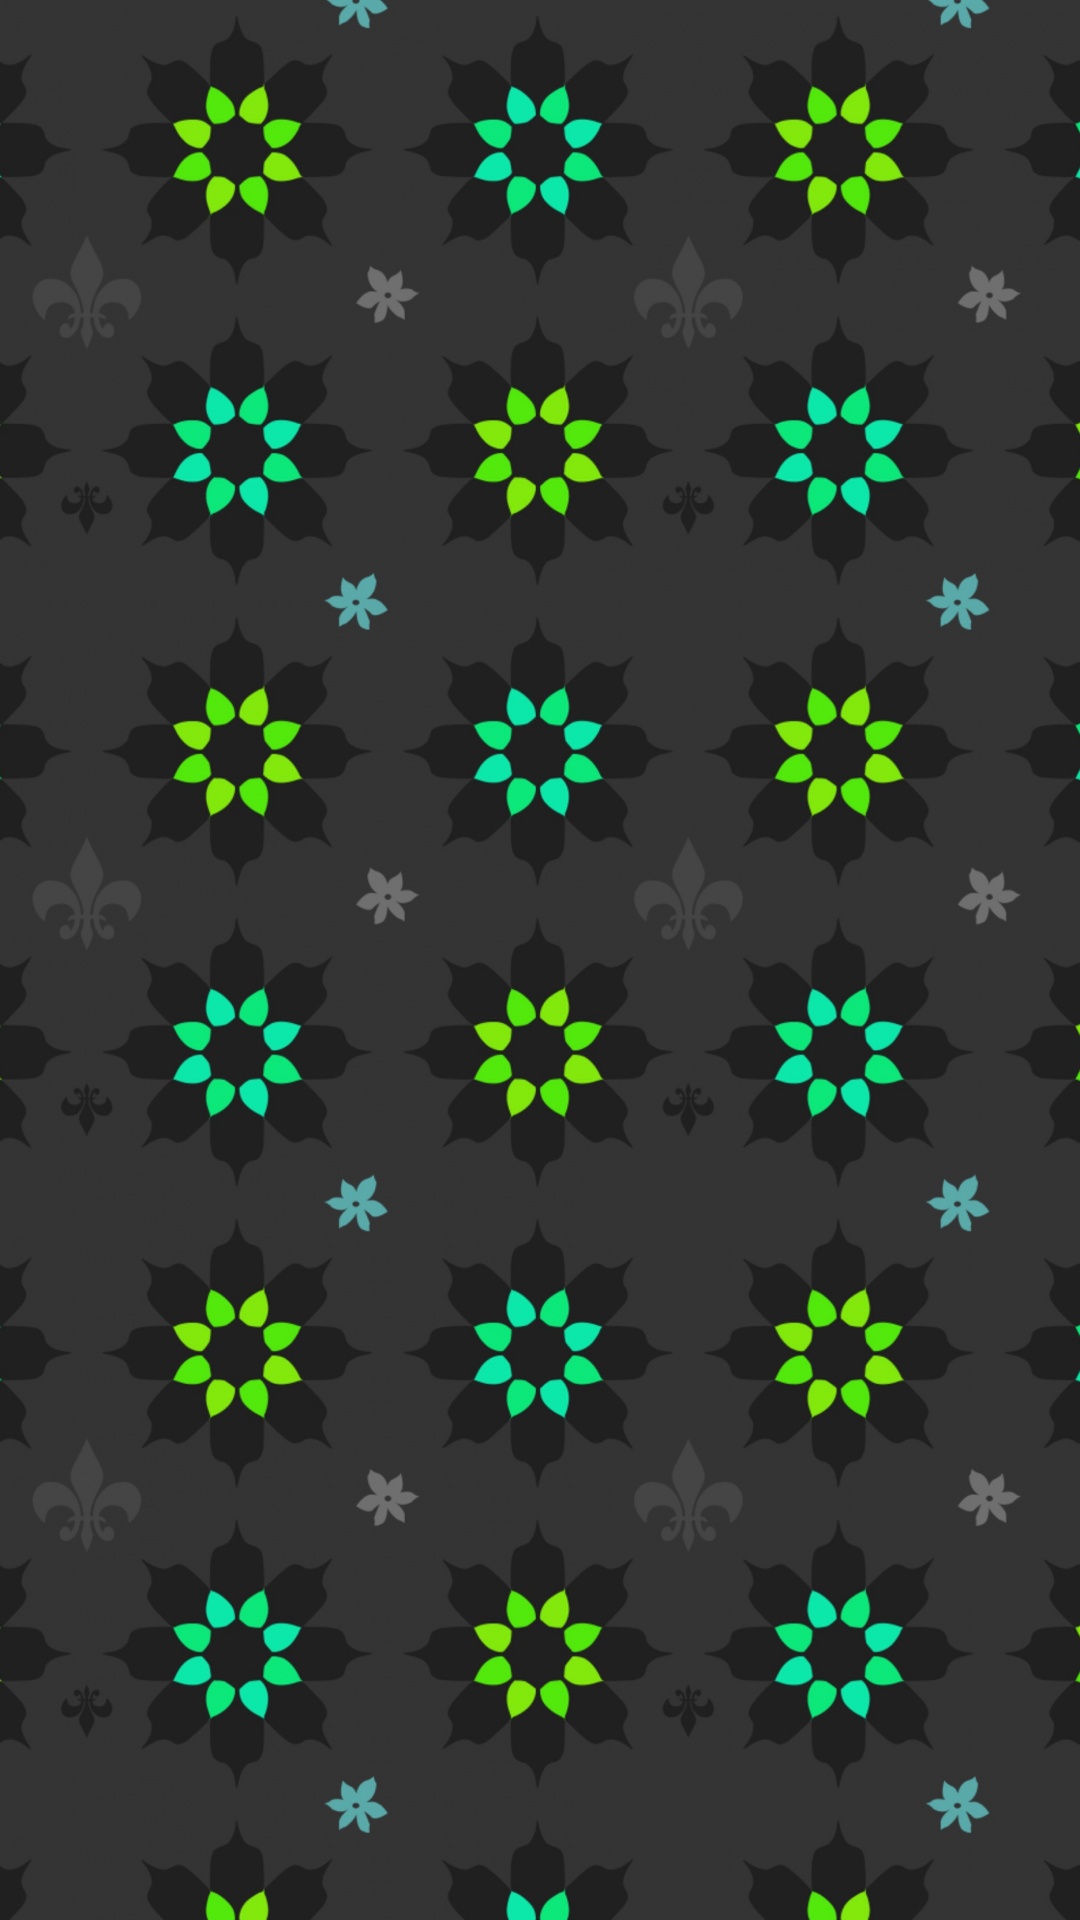 Black and White Star Print Textile. Wallpaper in 1080x1920 Resolution